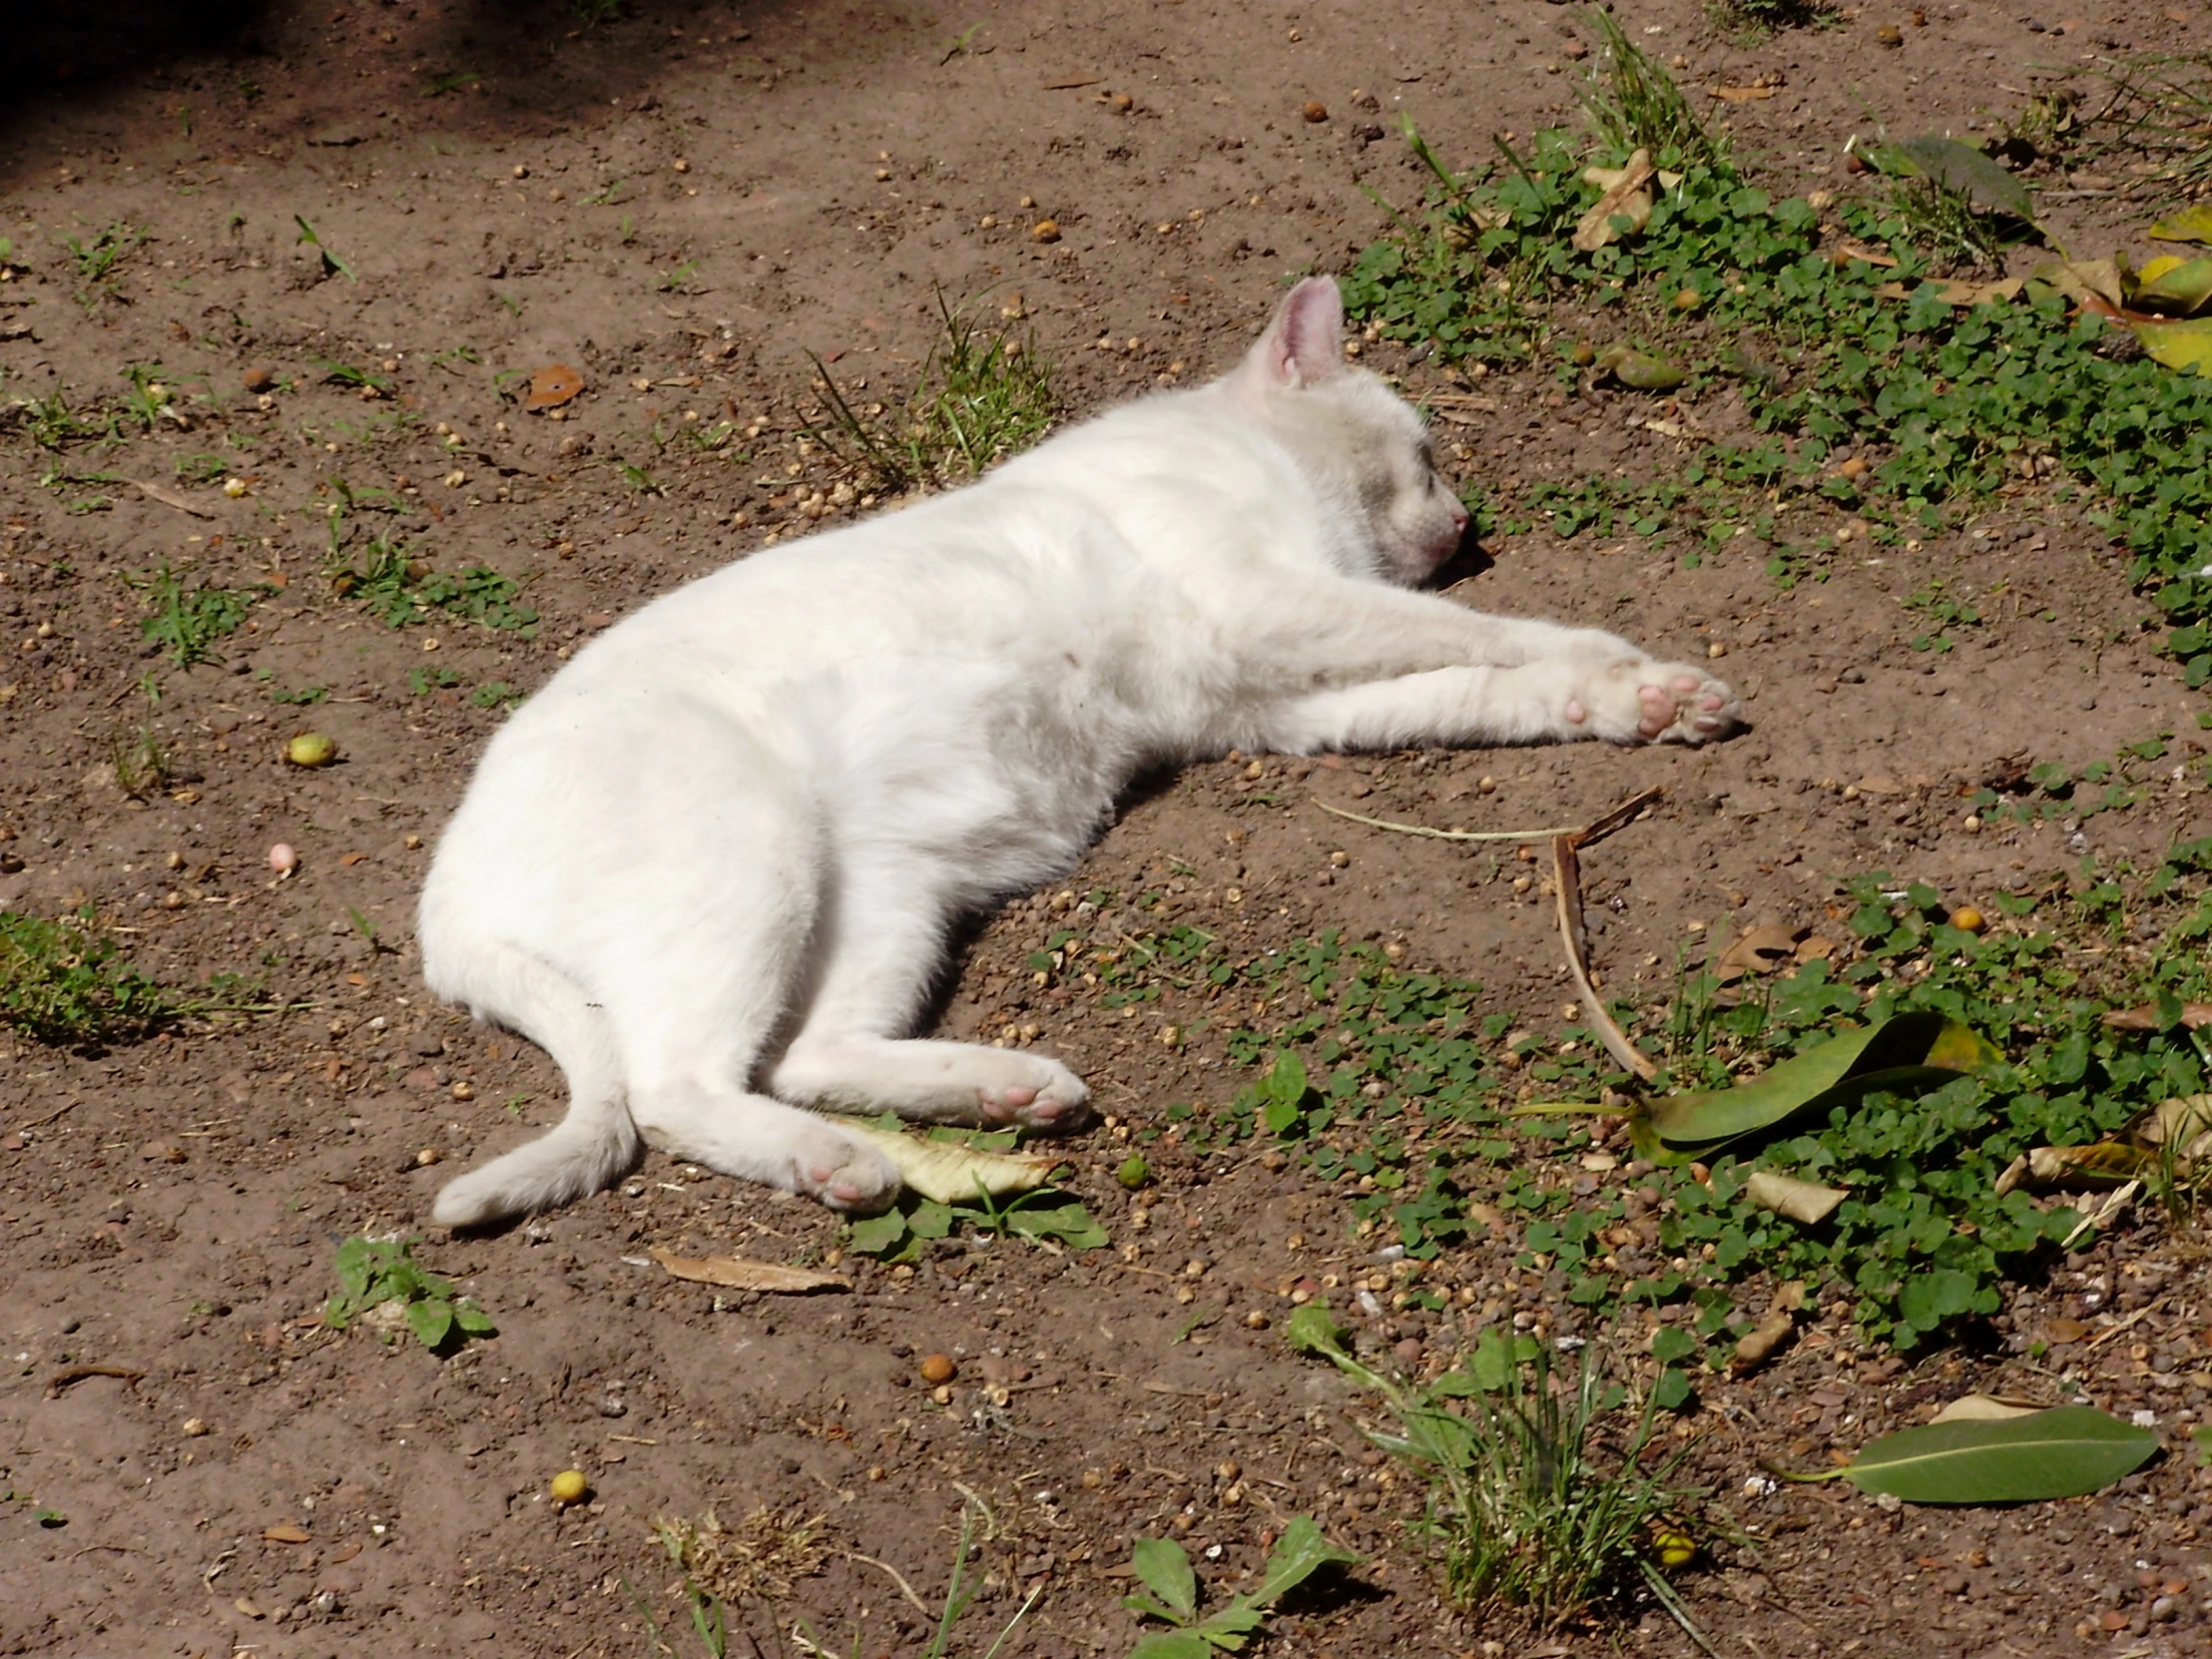 the white cat is laying on its back in the dirt